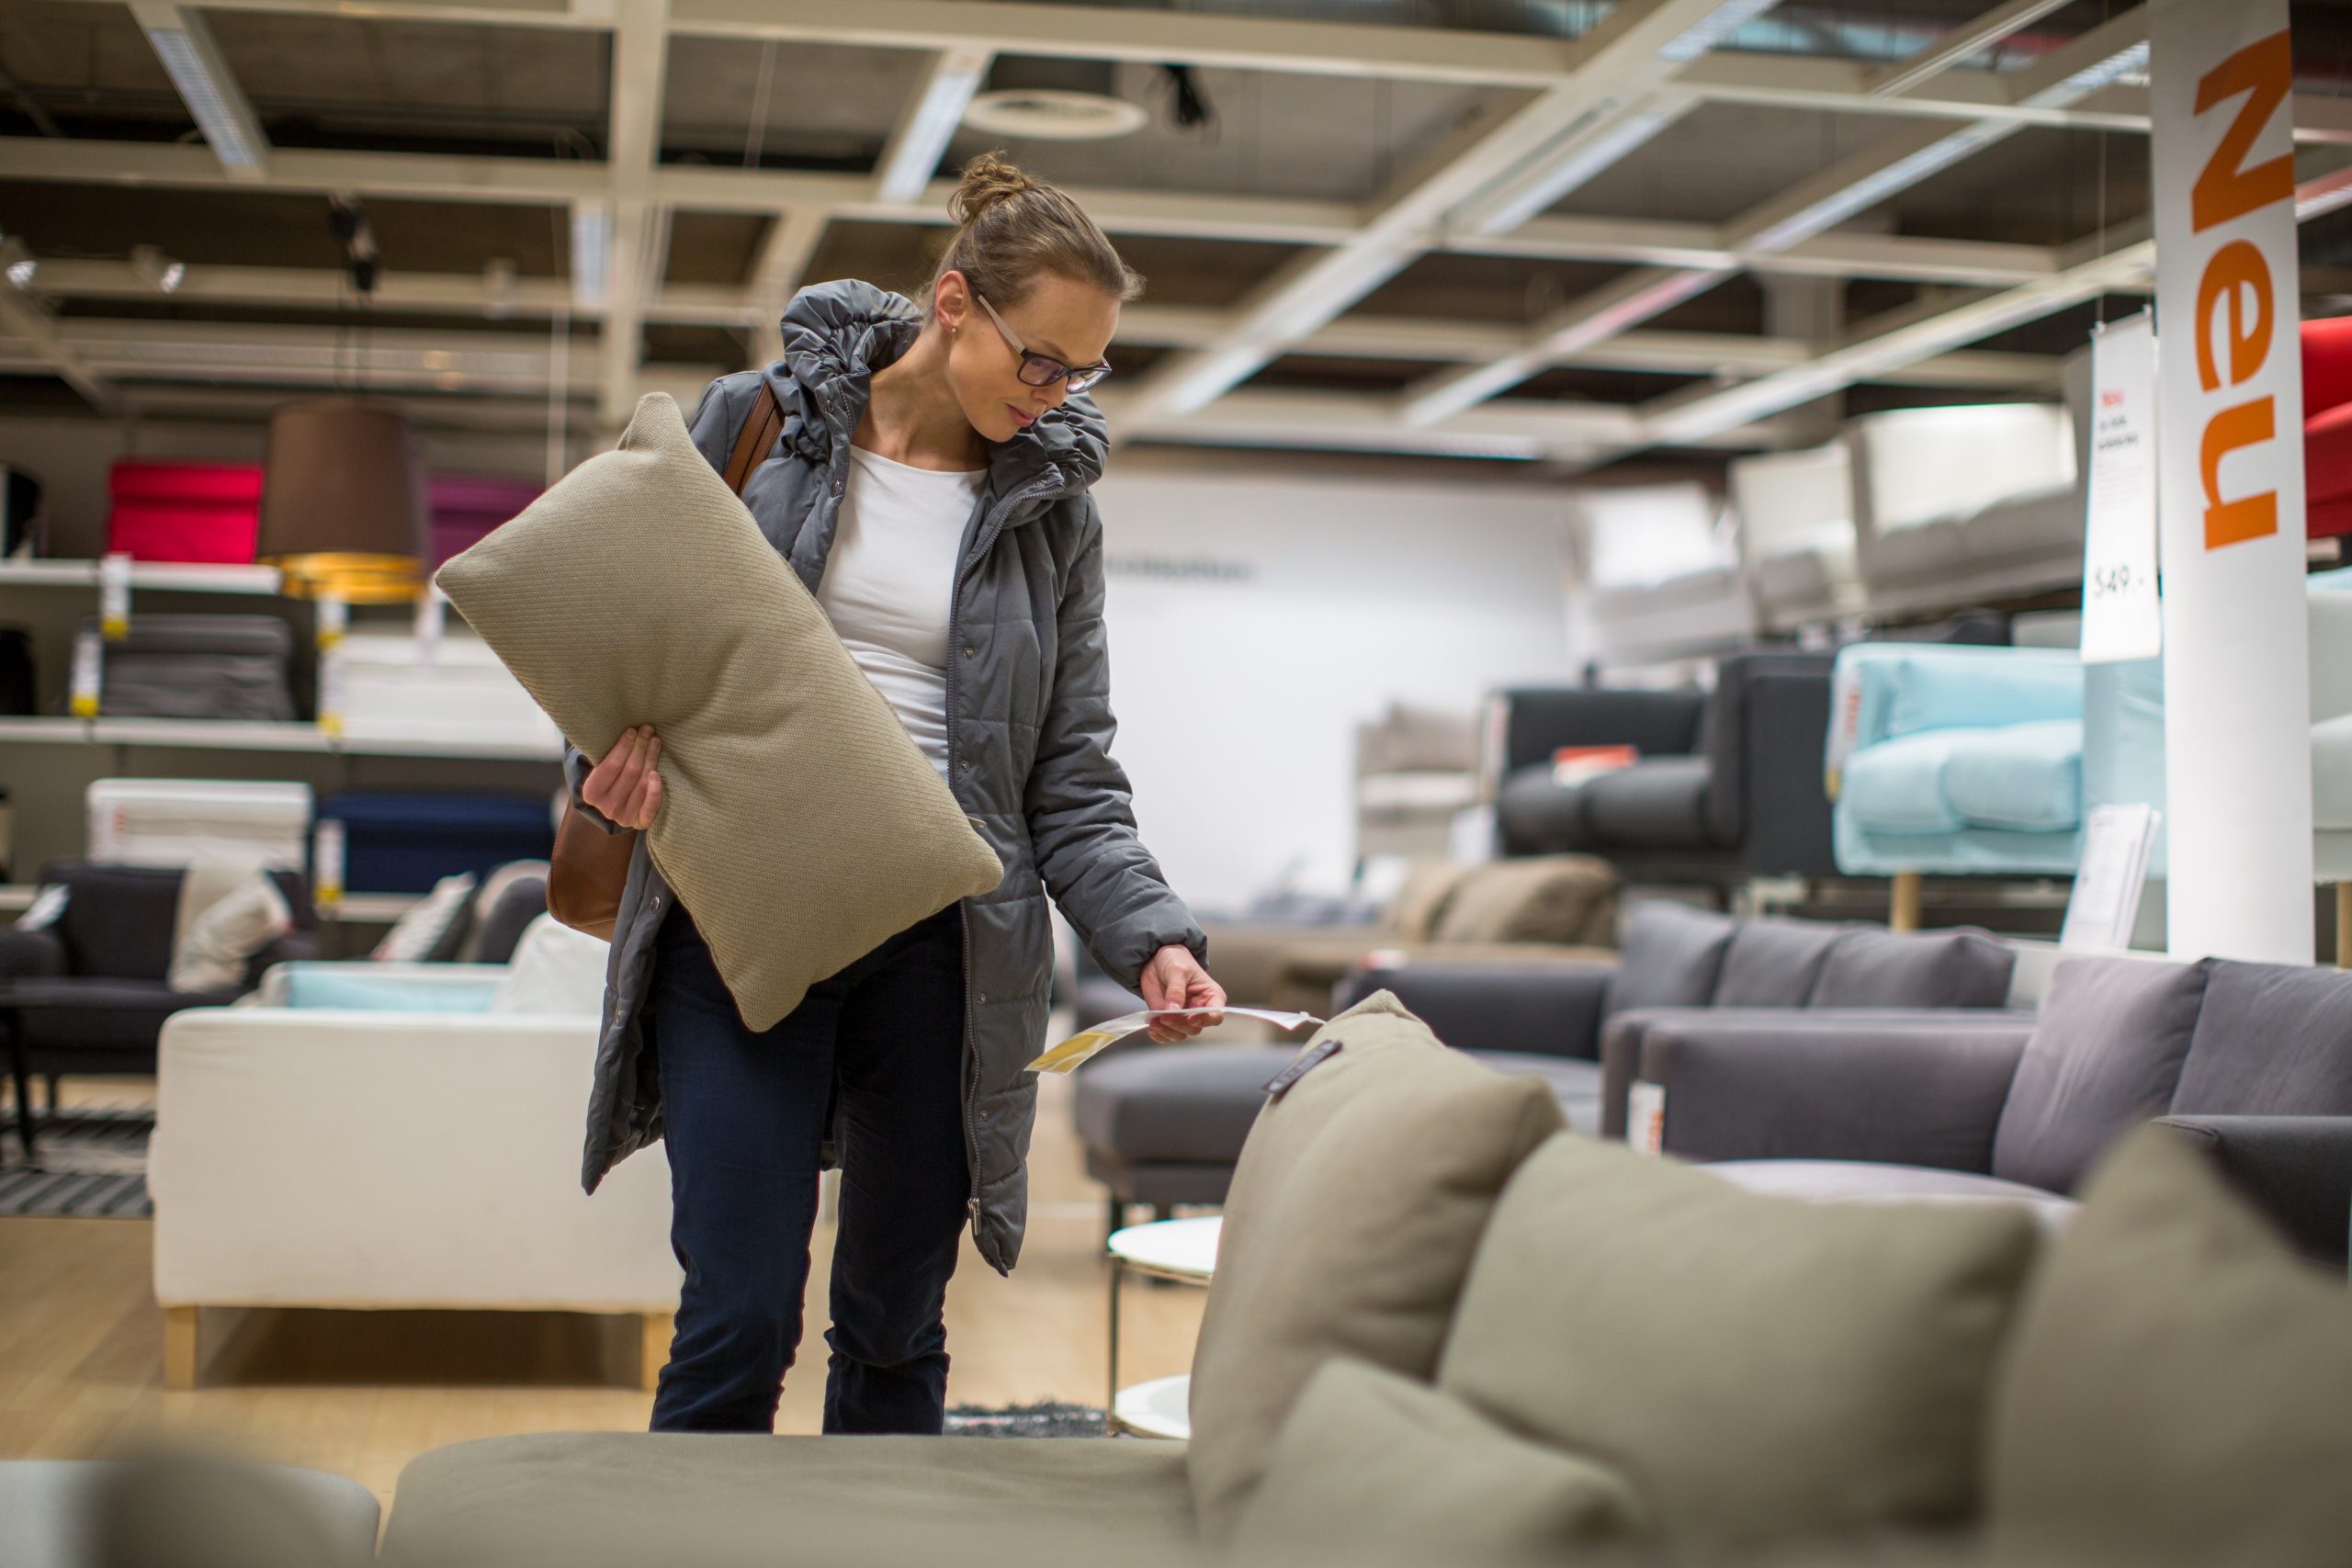 Helpful Tips For Furniture Shopping